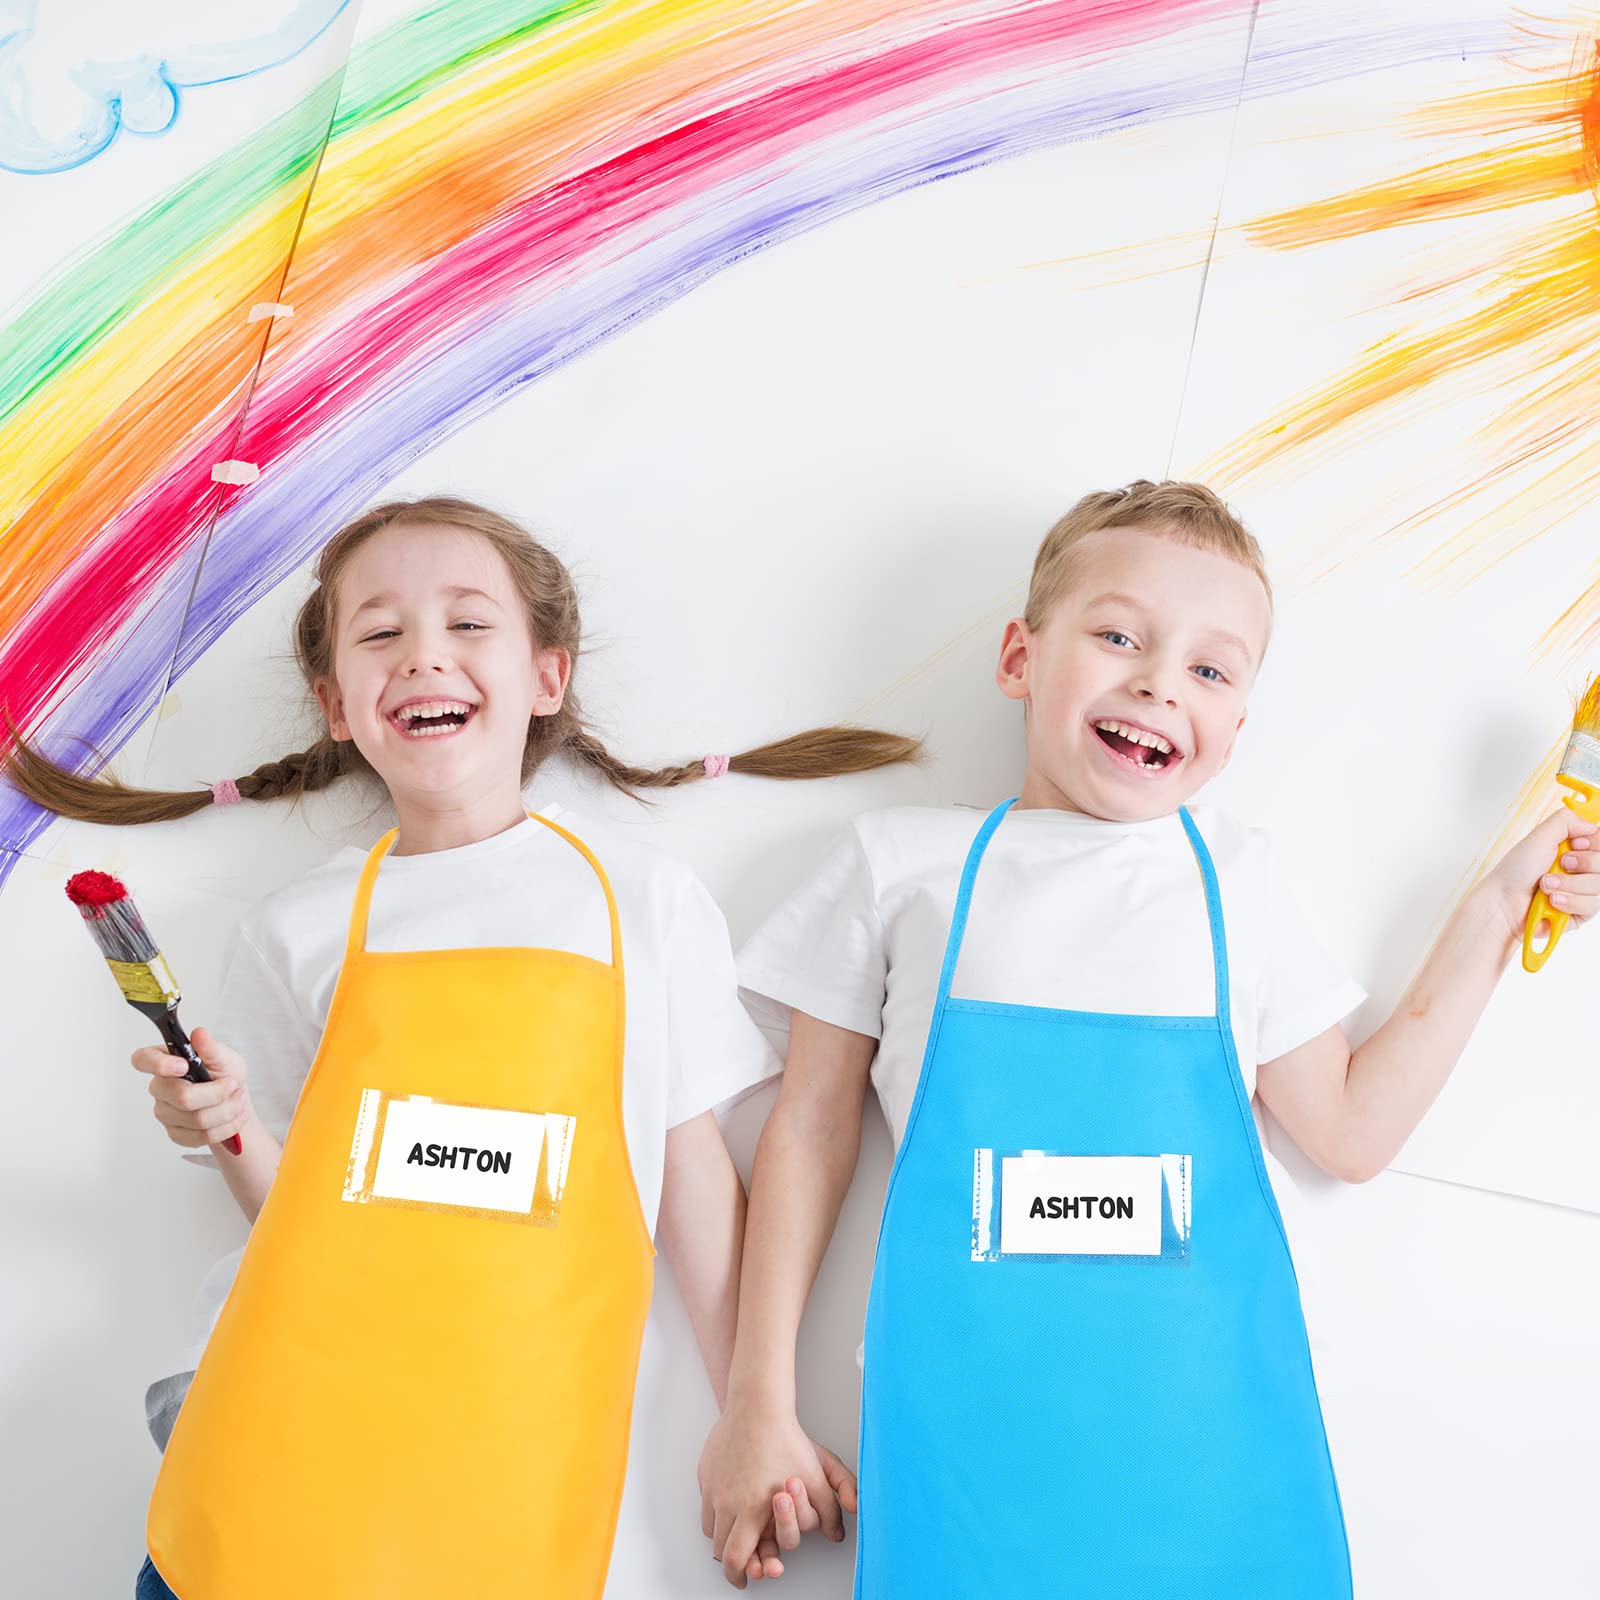 Shihanee 24 Pieces Artists Fabric Aprons with Pockets Kids Apron Bulk Toddler Art Smock Paint Apron for Kids Classroom, Crafts Painting Activity, Kitchen Community Event, Birthday Supplies, 12 Colors